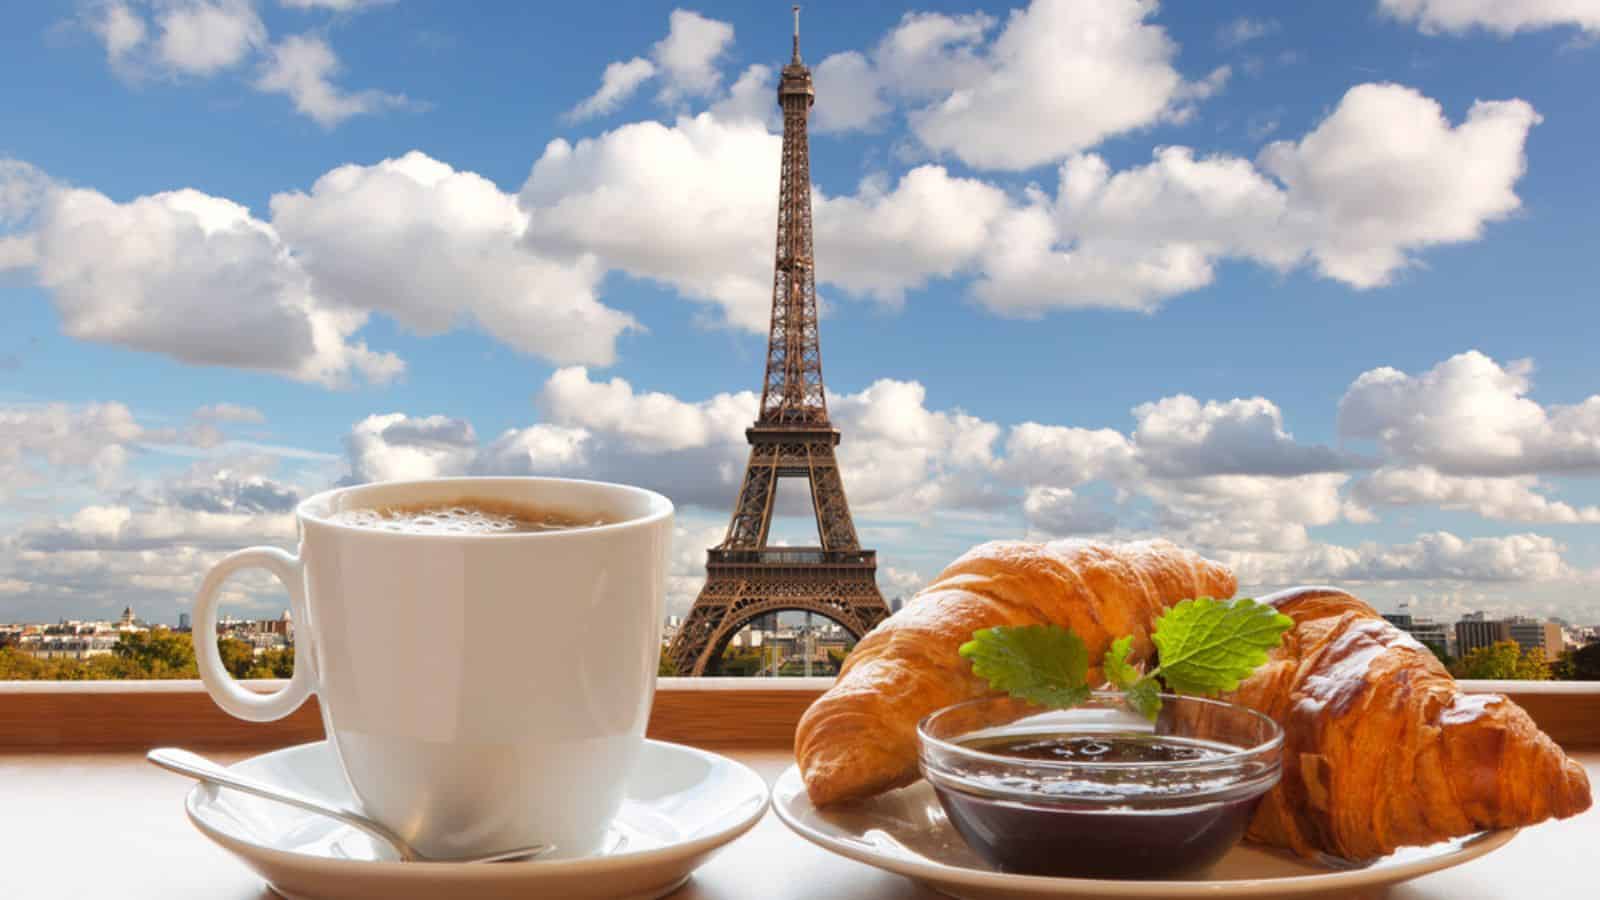 Coffee with croissants against Eiffel Tower in Paris